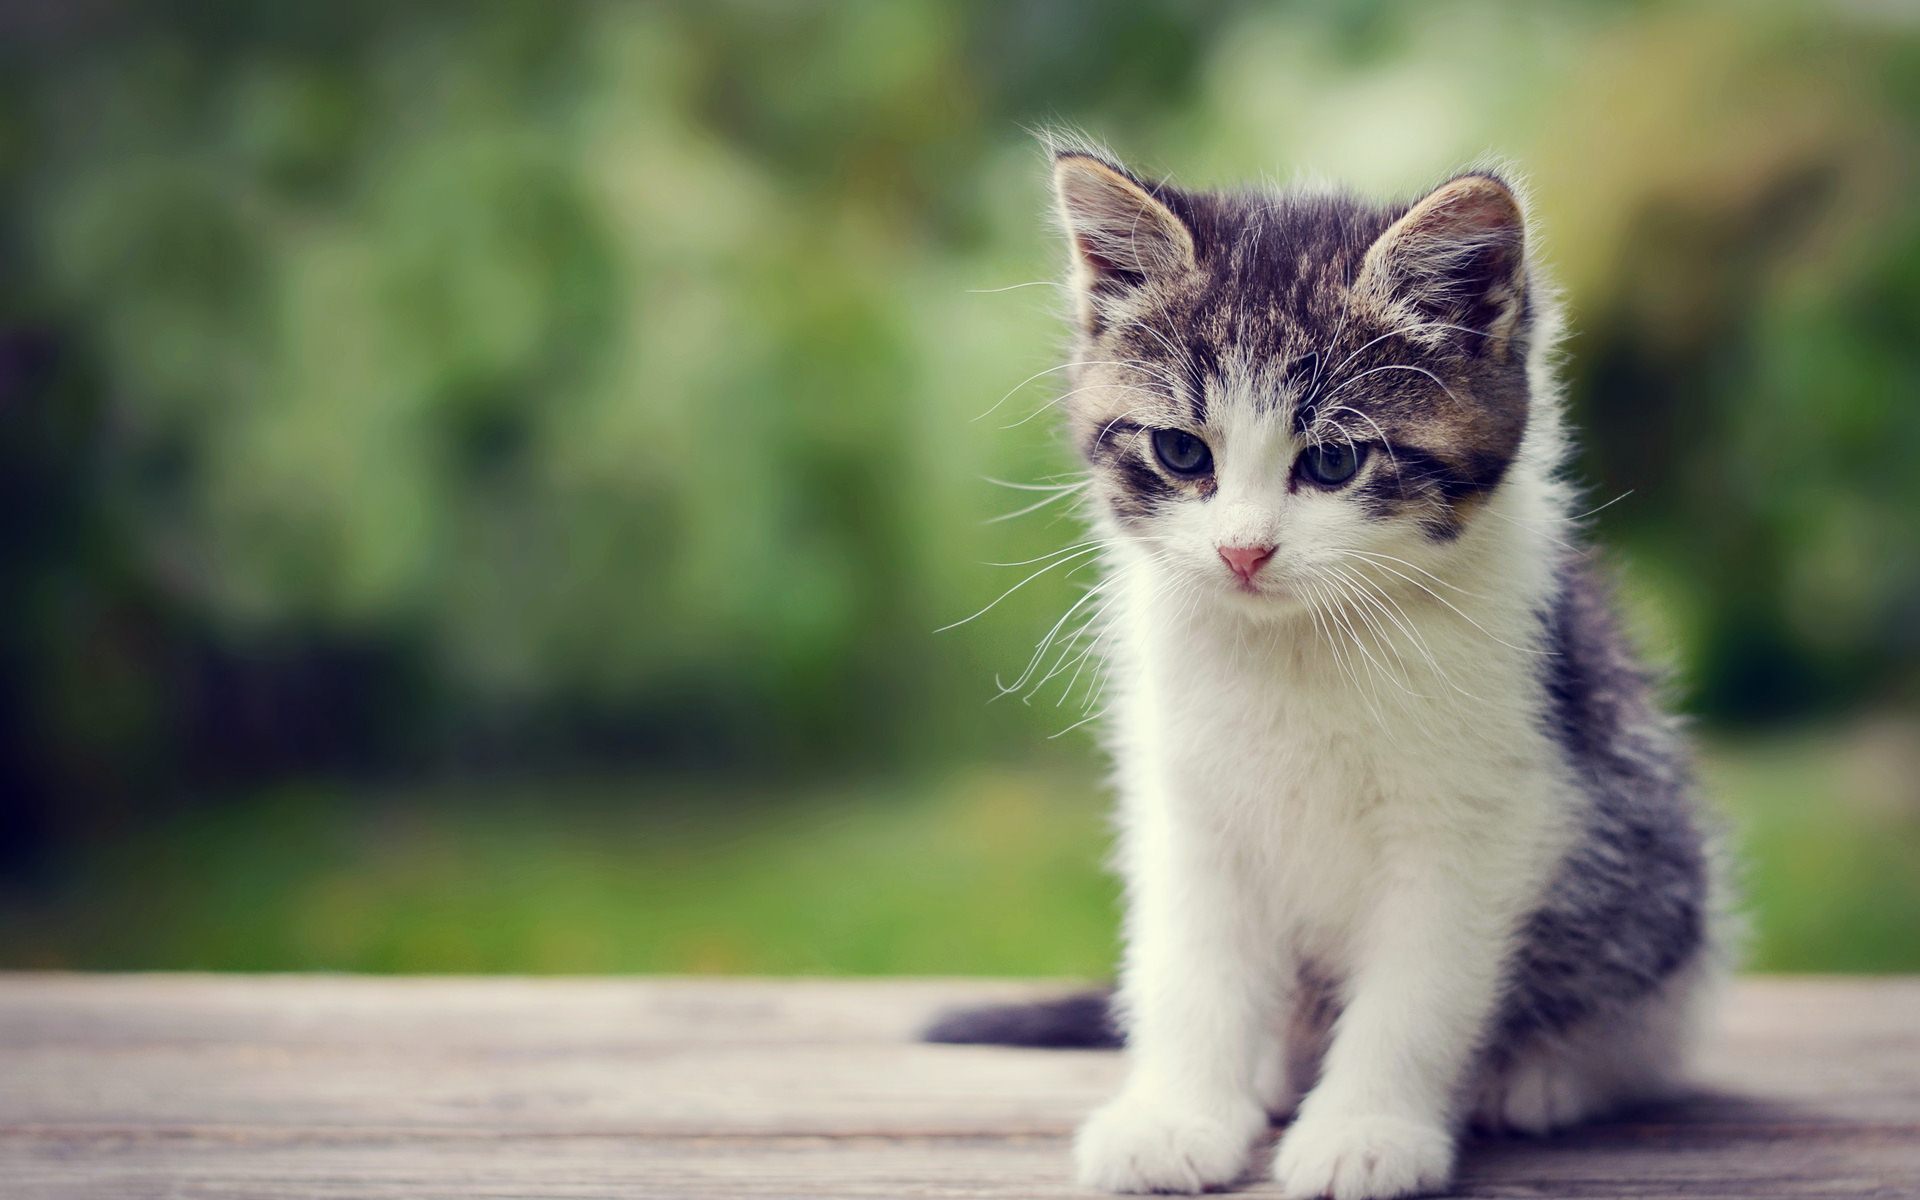 Pics Photos Posts Related To Cute Kitten Wallpaper For